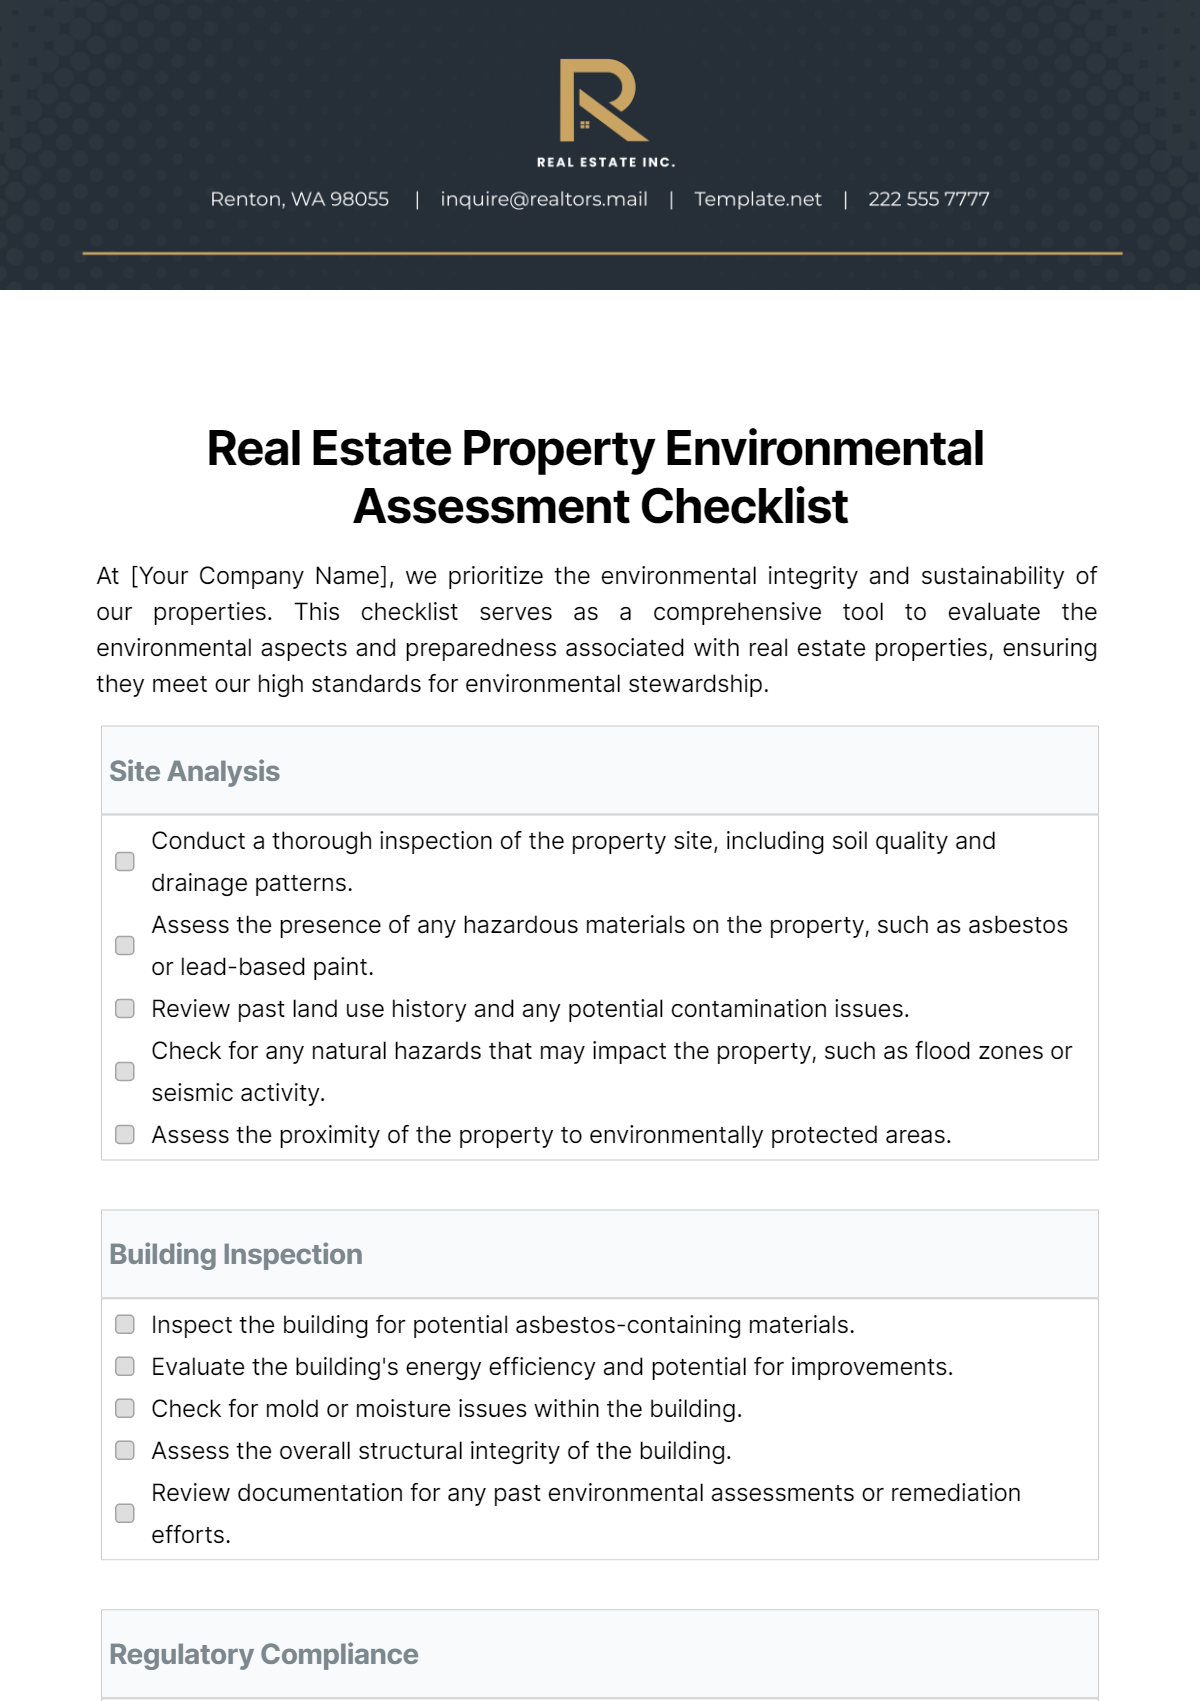 Real Estate Property Environmental Assessment Checklist Template